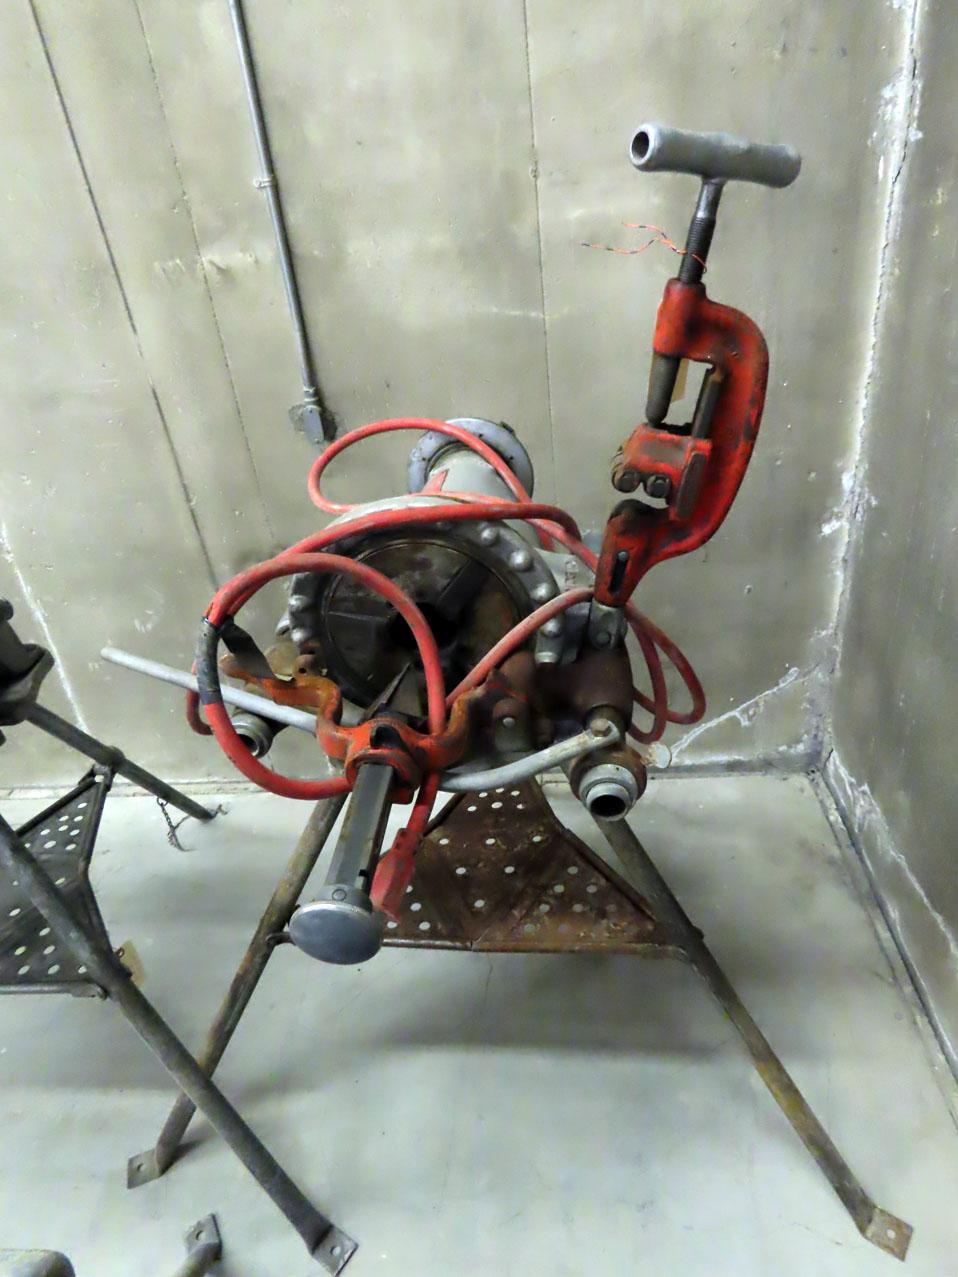 Ridgid Model 300 Portable Electric Pipe Threader on Stand with Pipe Cutter & Reamer Attachments.